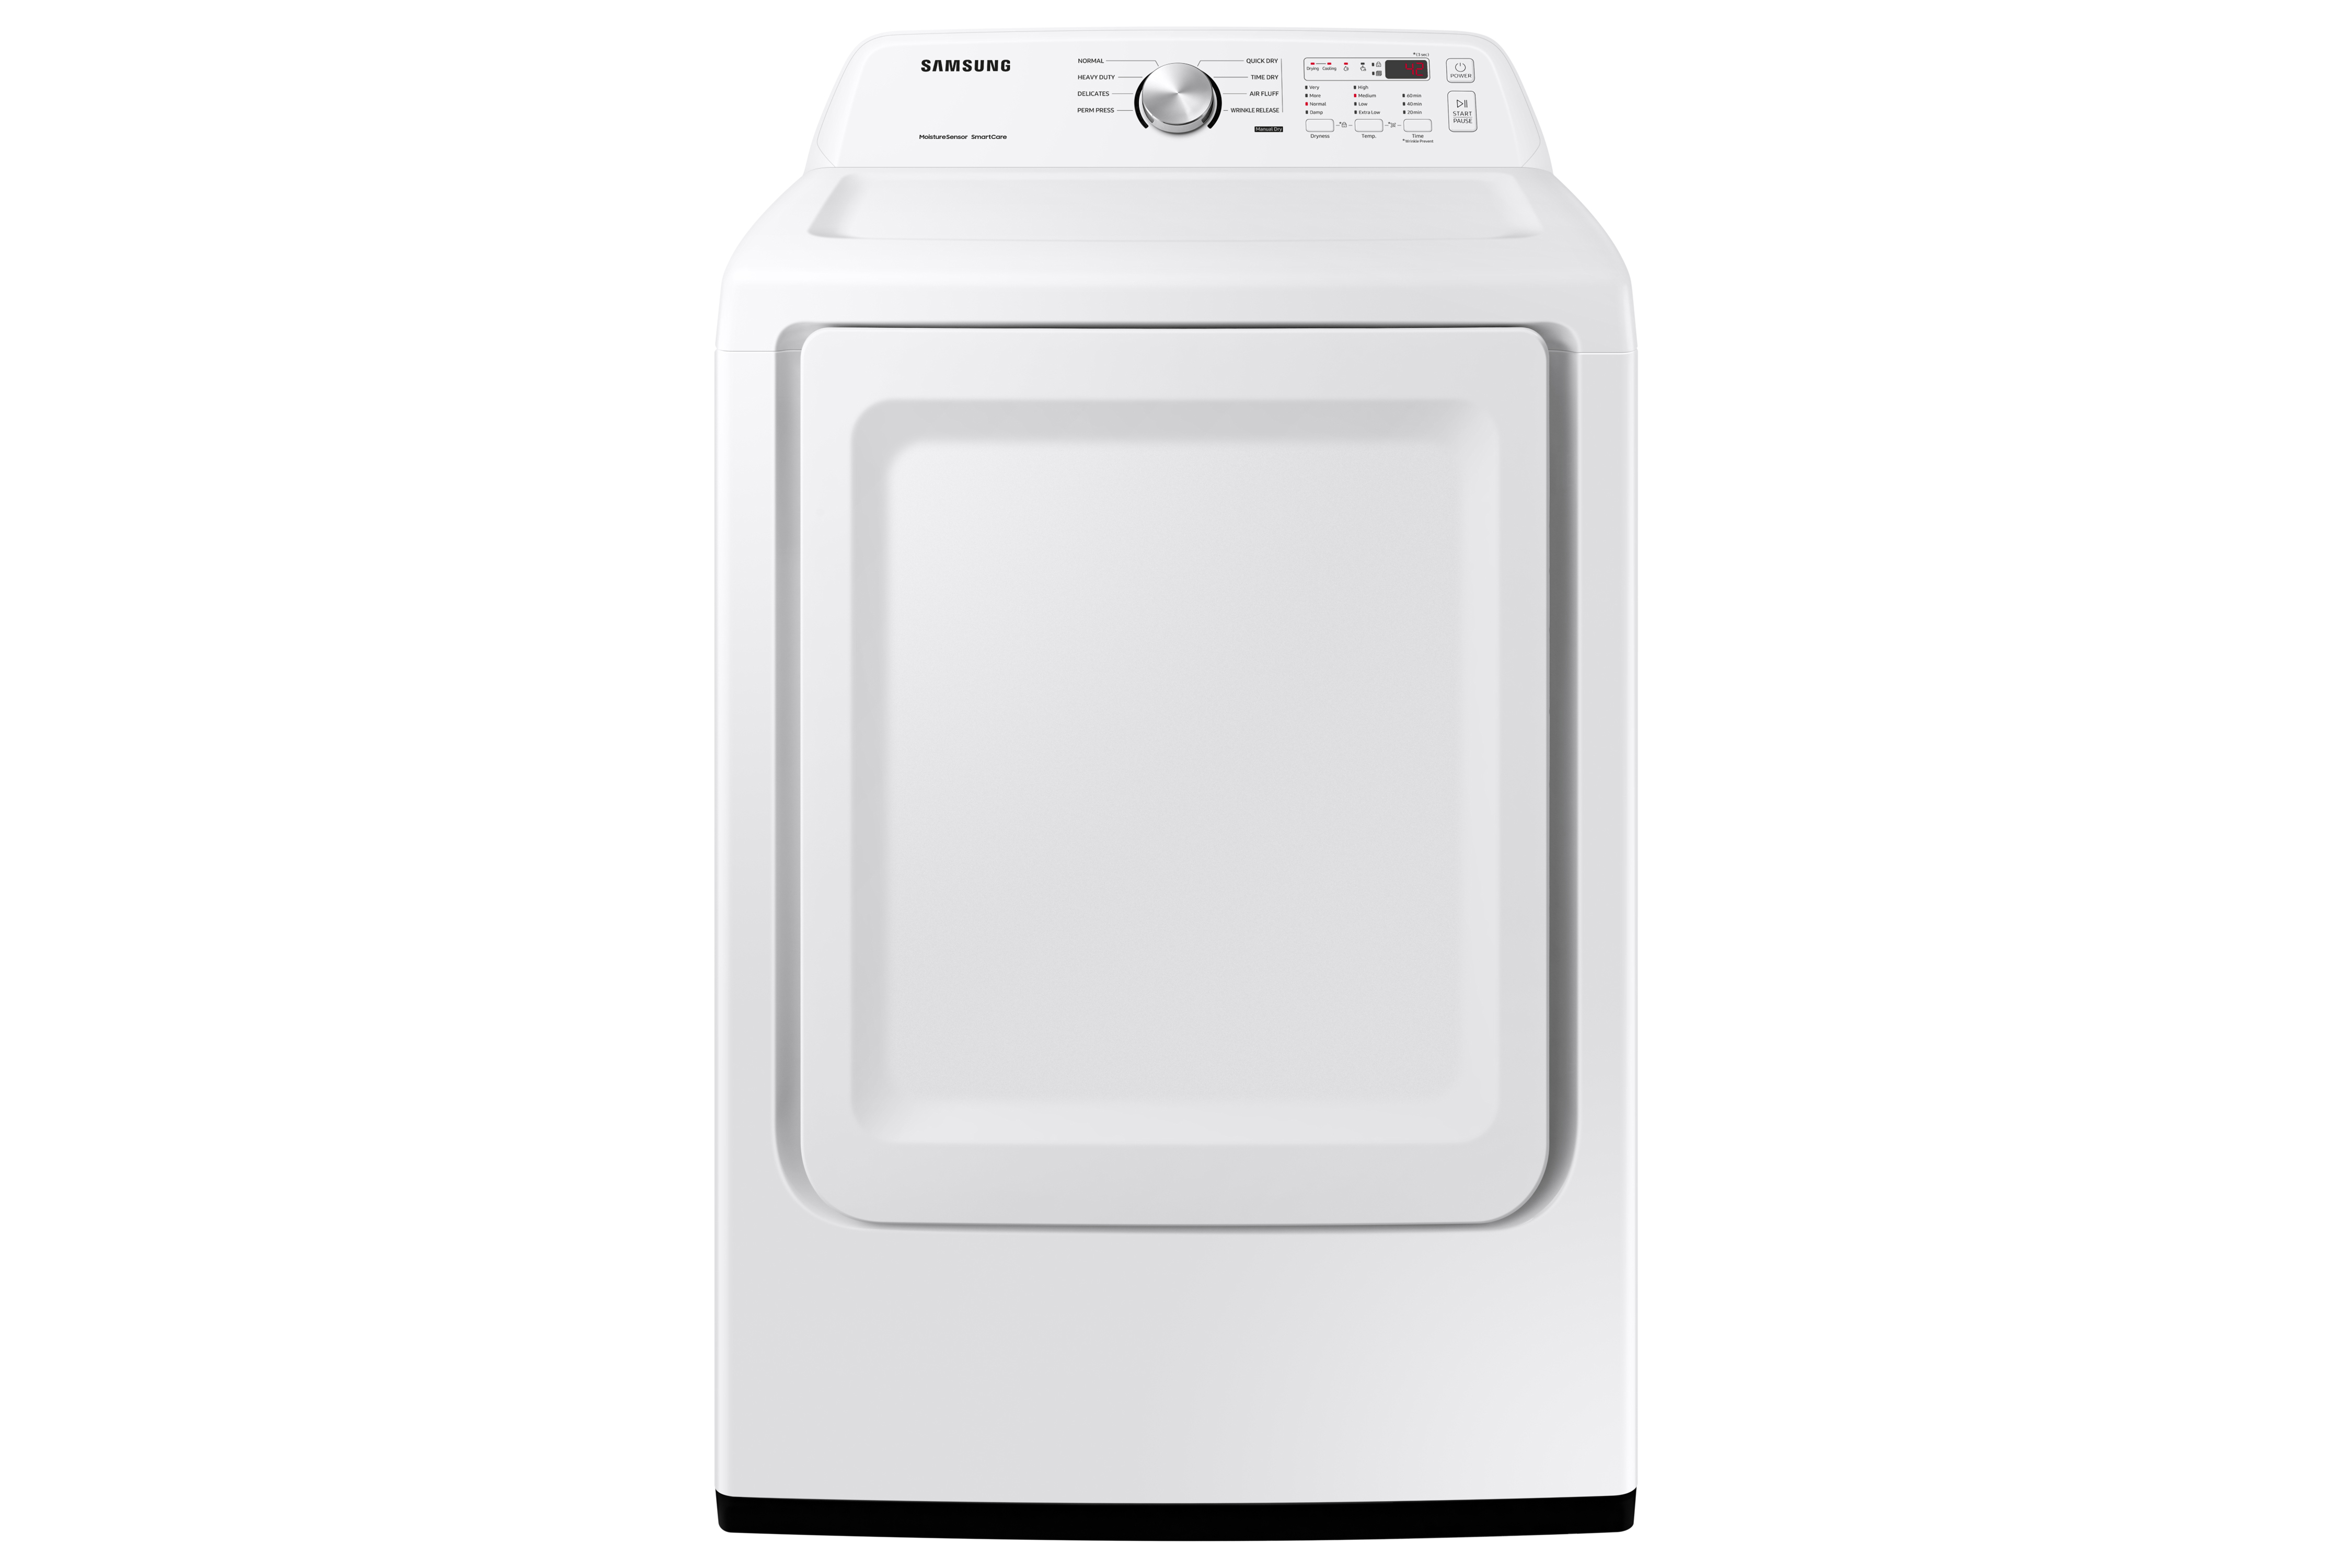 Samsung DVG45T3200W/A3  7.2 cu.ft. Gas Dryer with Sensor Dry - White